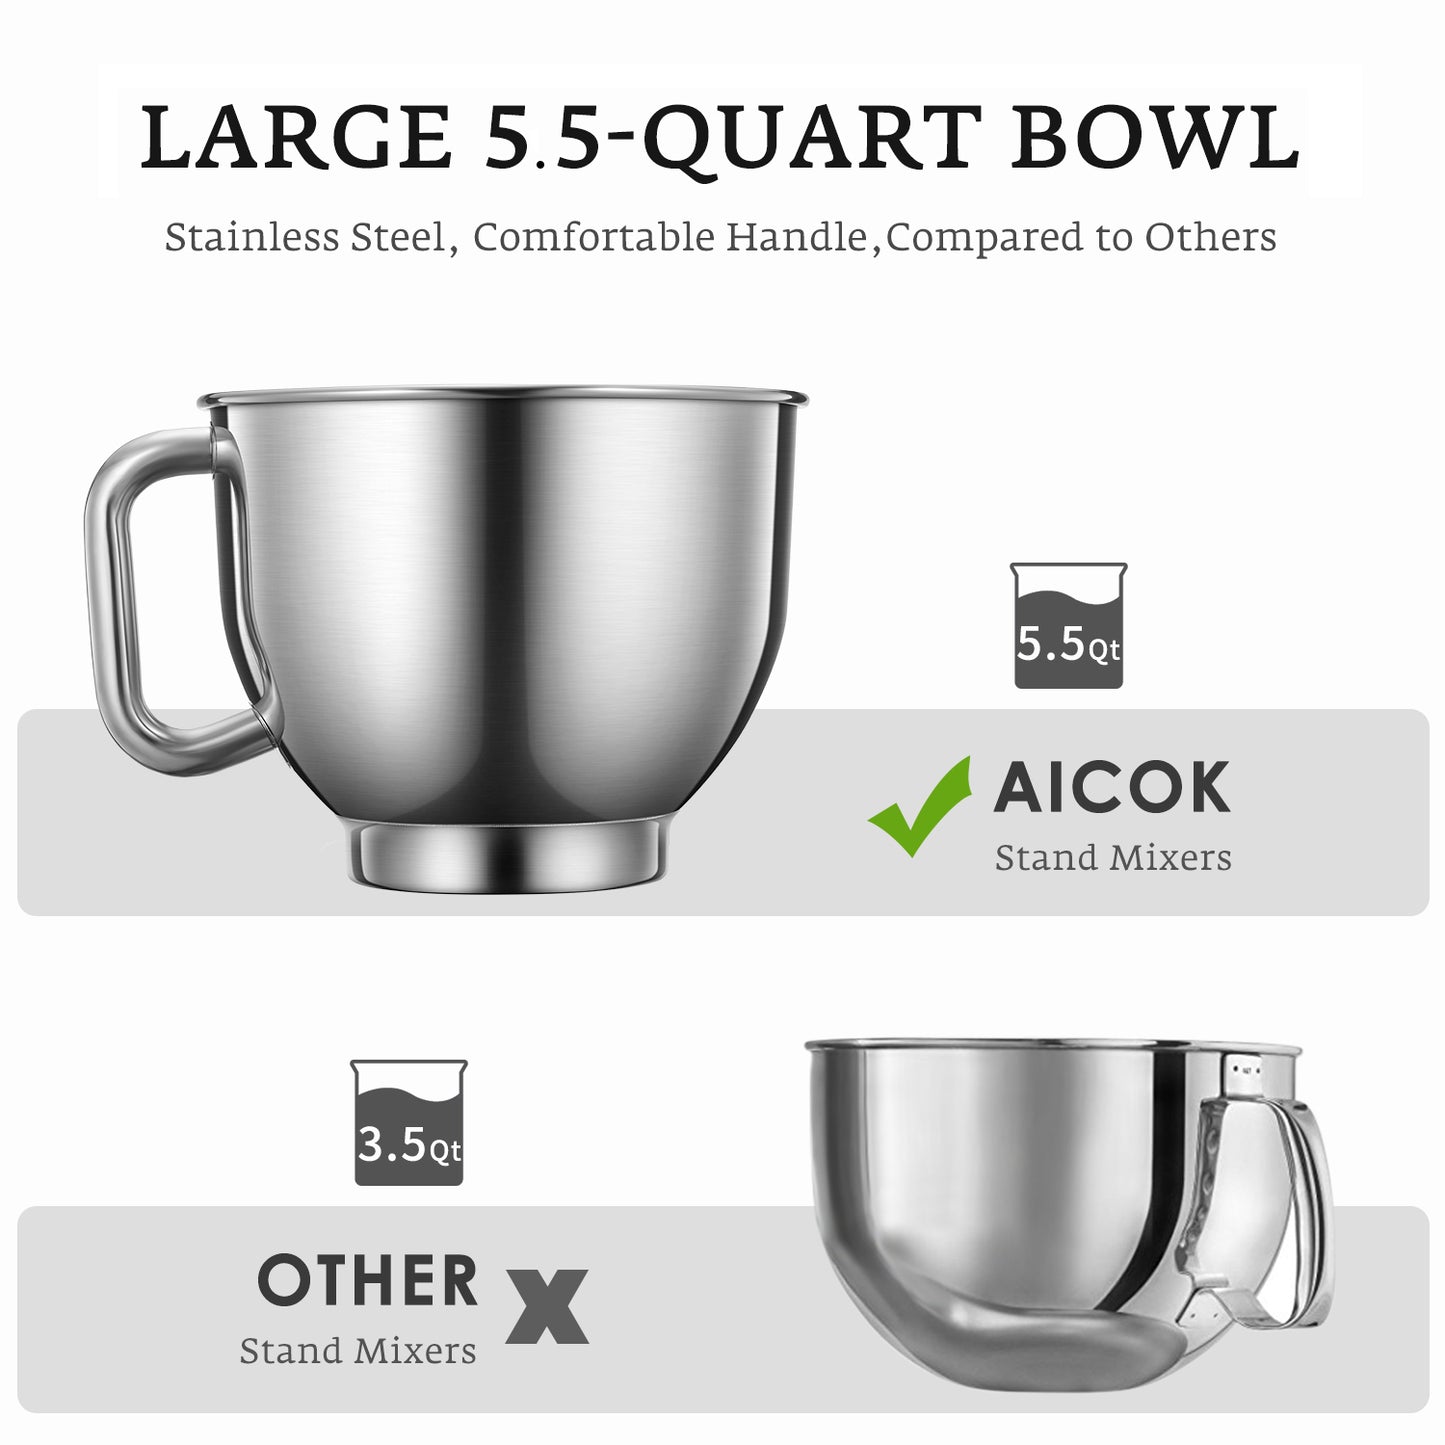 AICOK - Stand Mixer, Professional 5.5 QT Food Mixer MK37, stainless steel bowl, convenient handle 